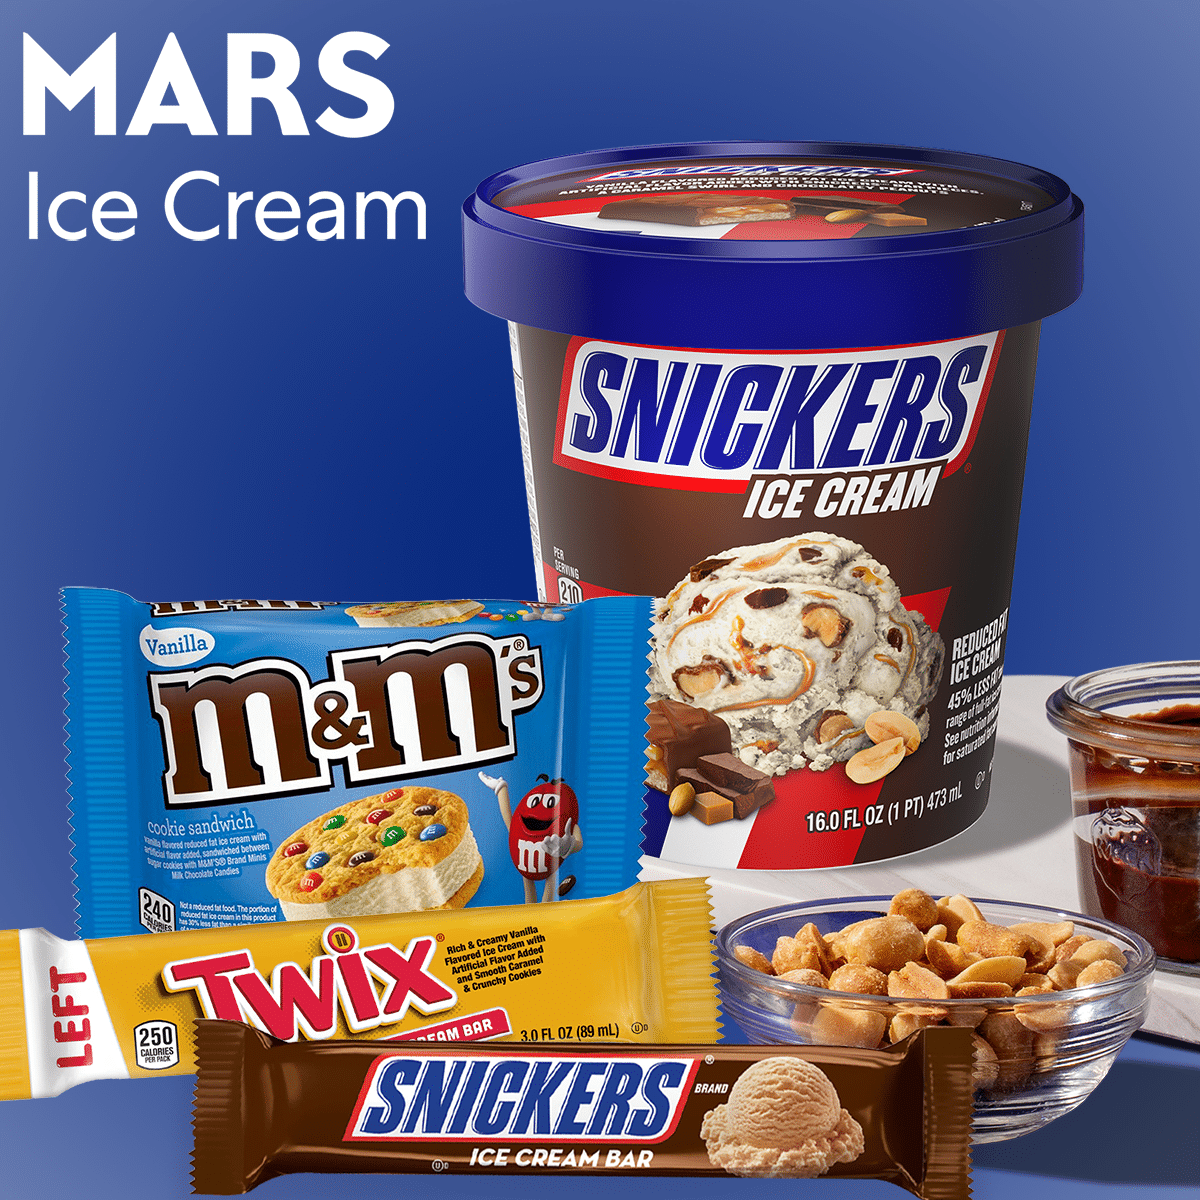 mars ice cream from wholesale distributor transcold distribution